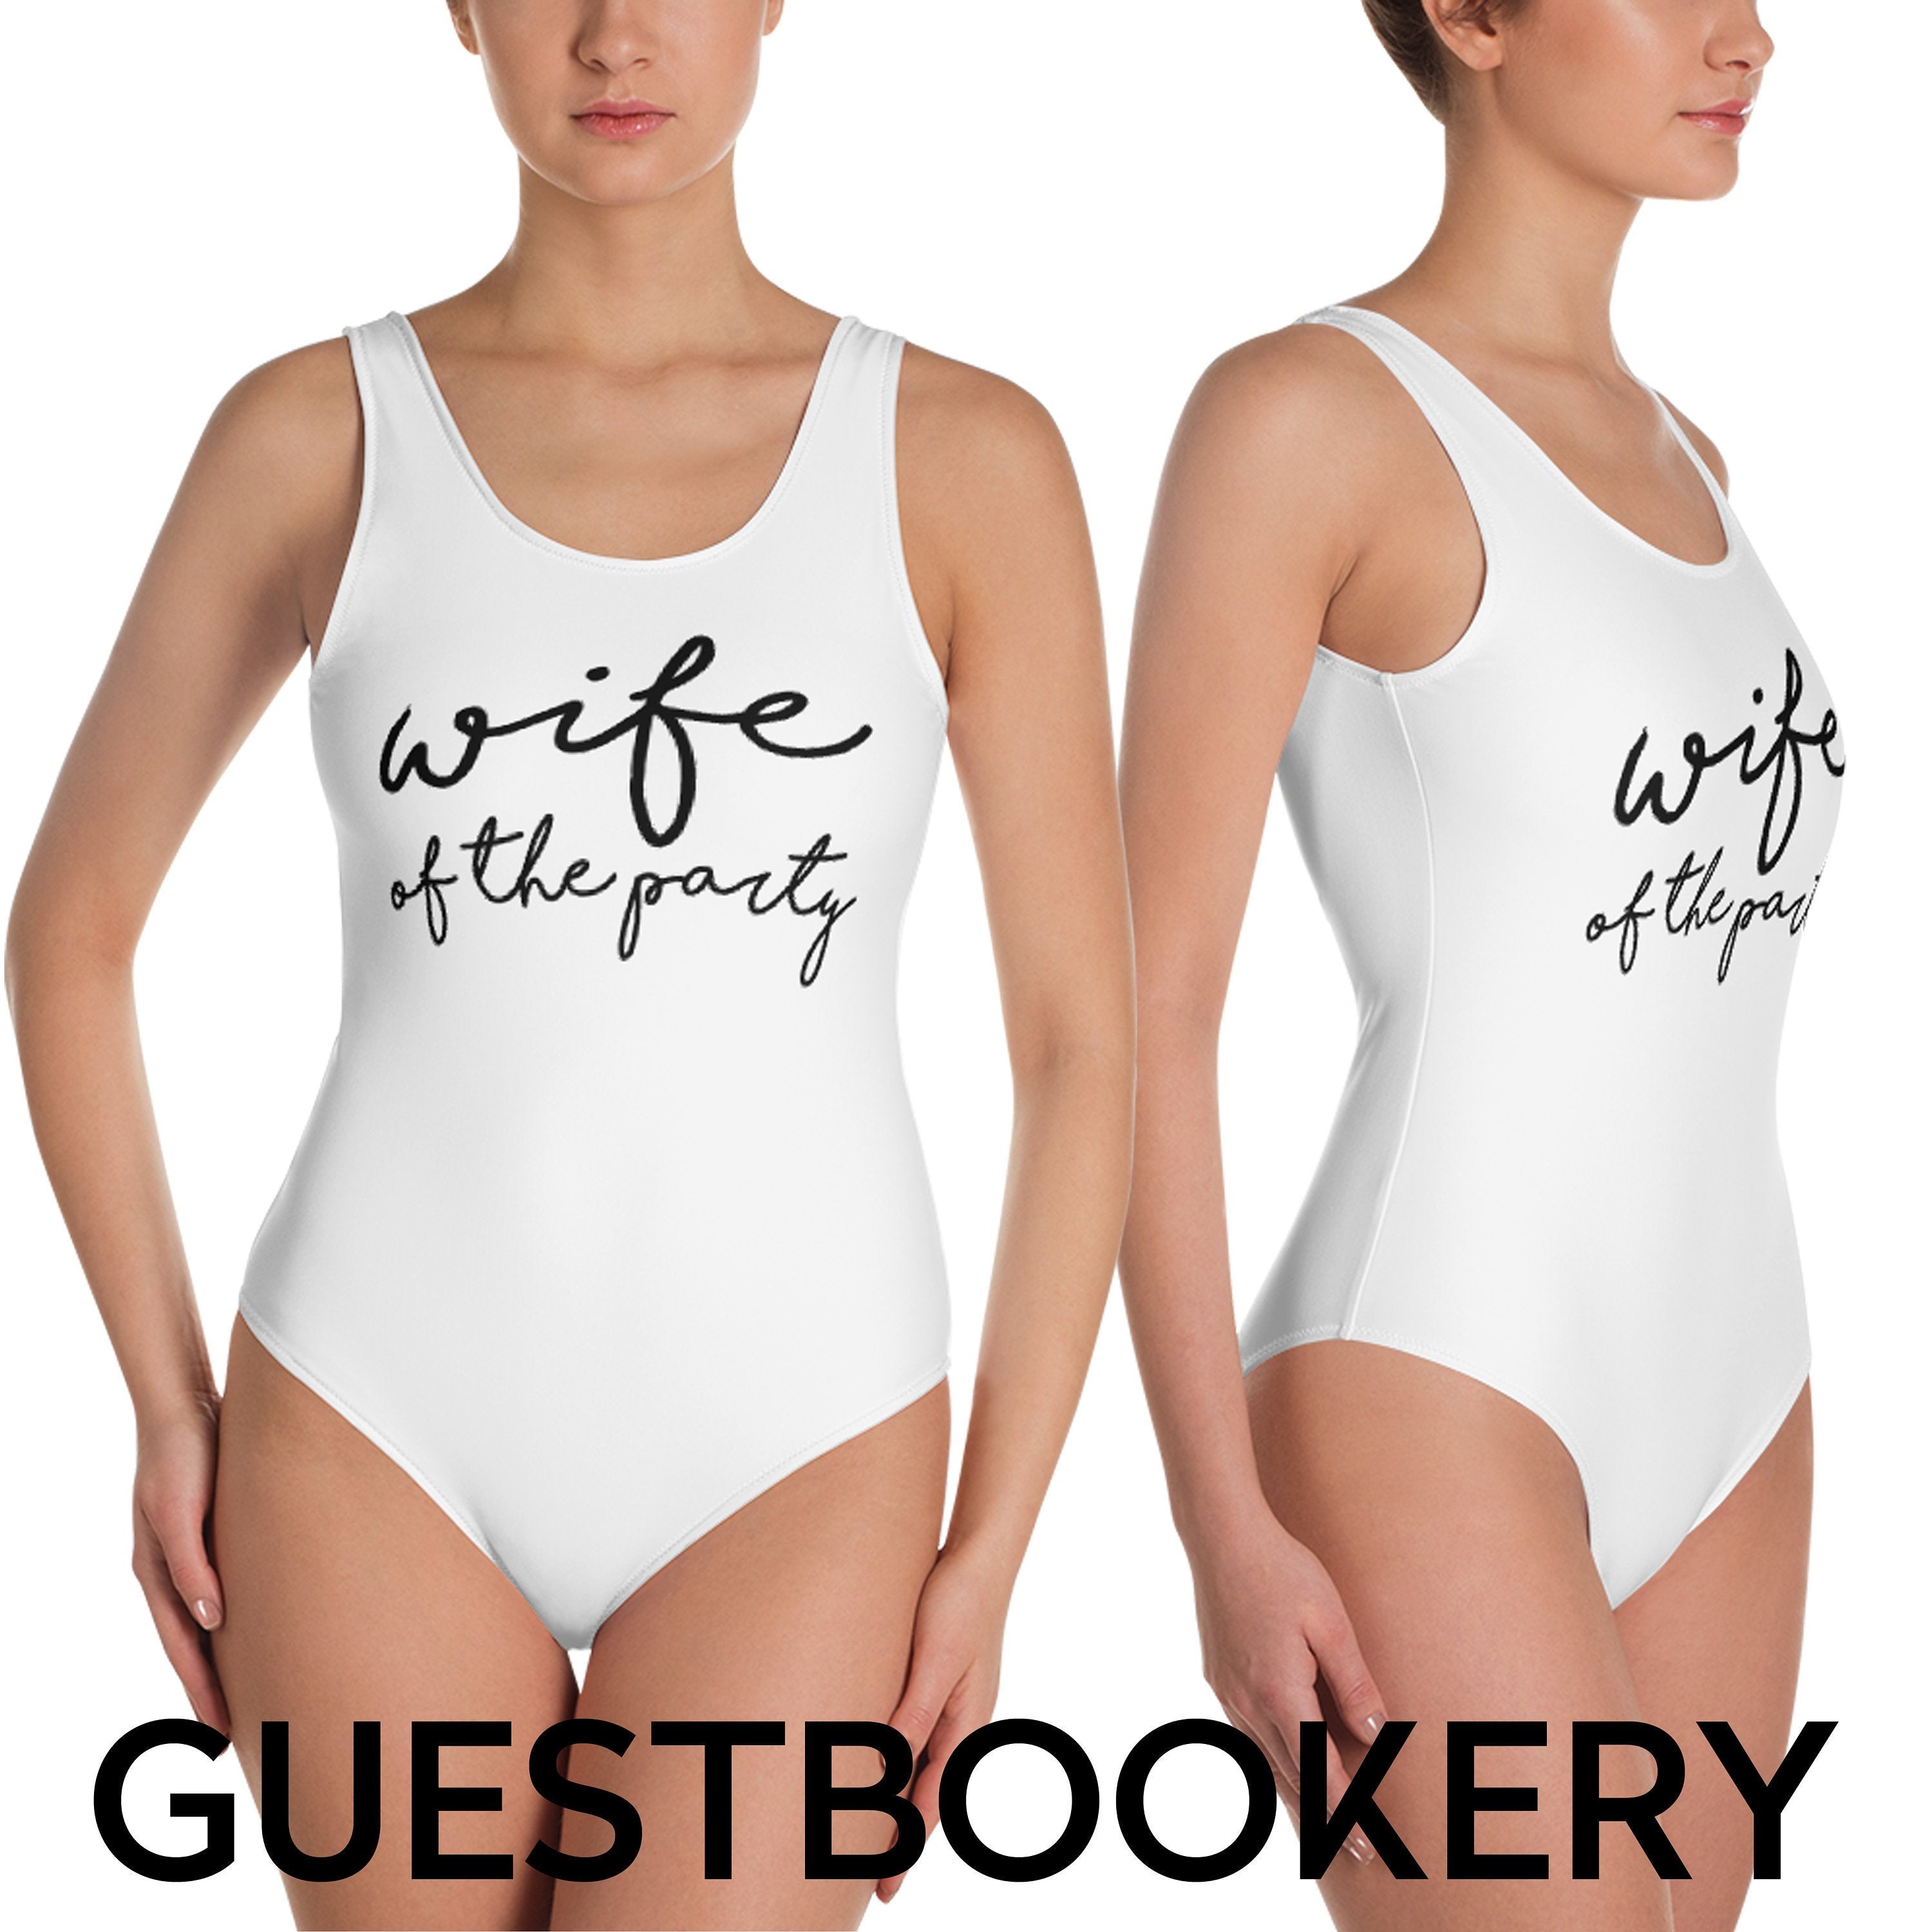 Wife Of The Party Swimsuit - Guestbookery